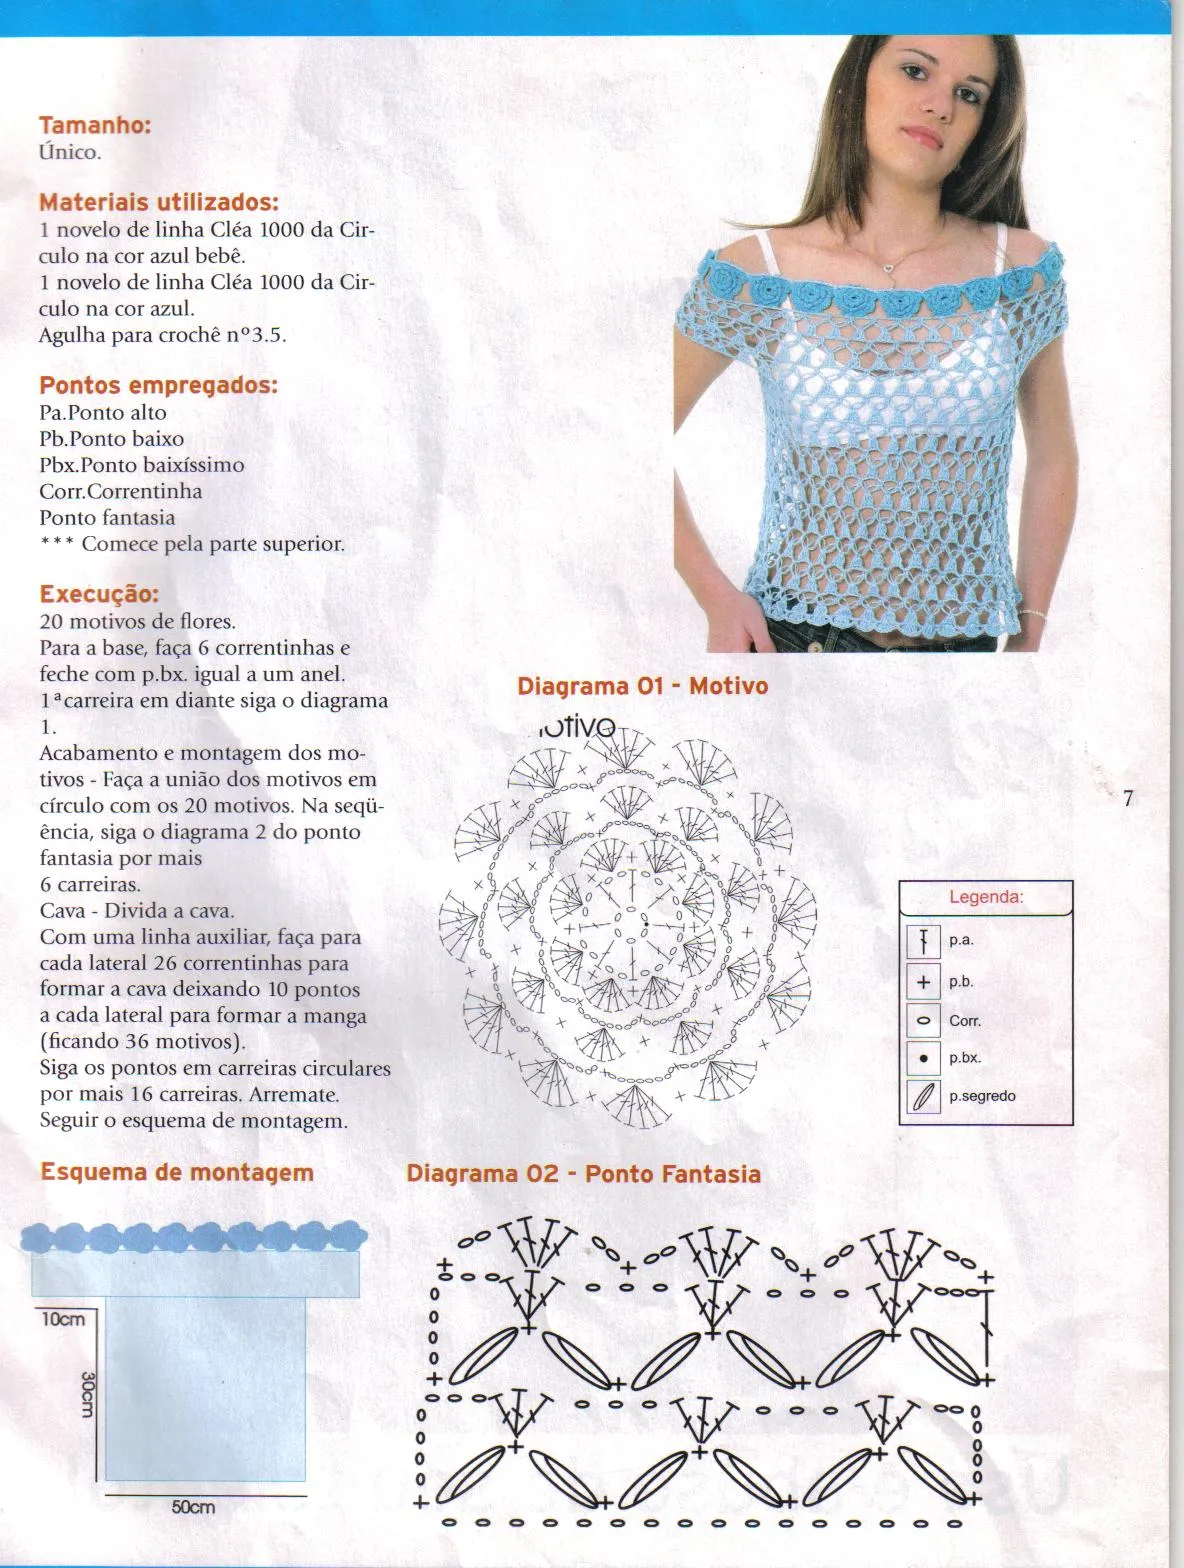 Related Pictures Images Of Blusas Tejidas En Crochet Tejidos A ...